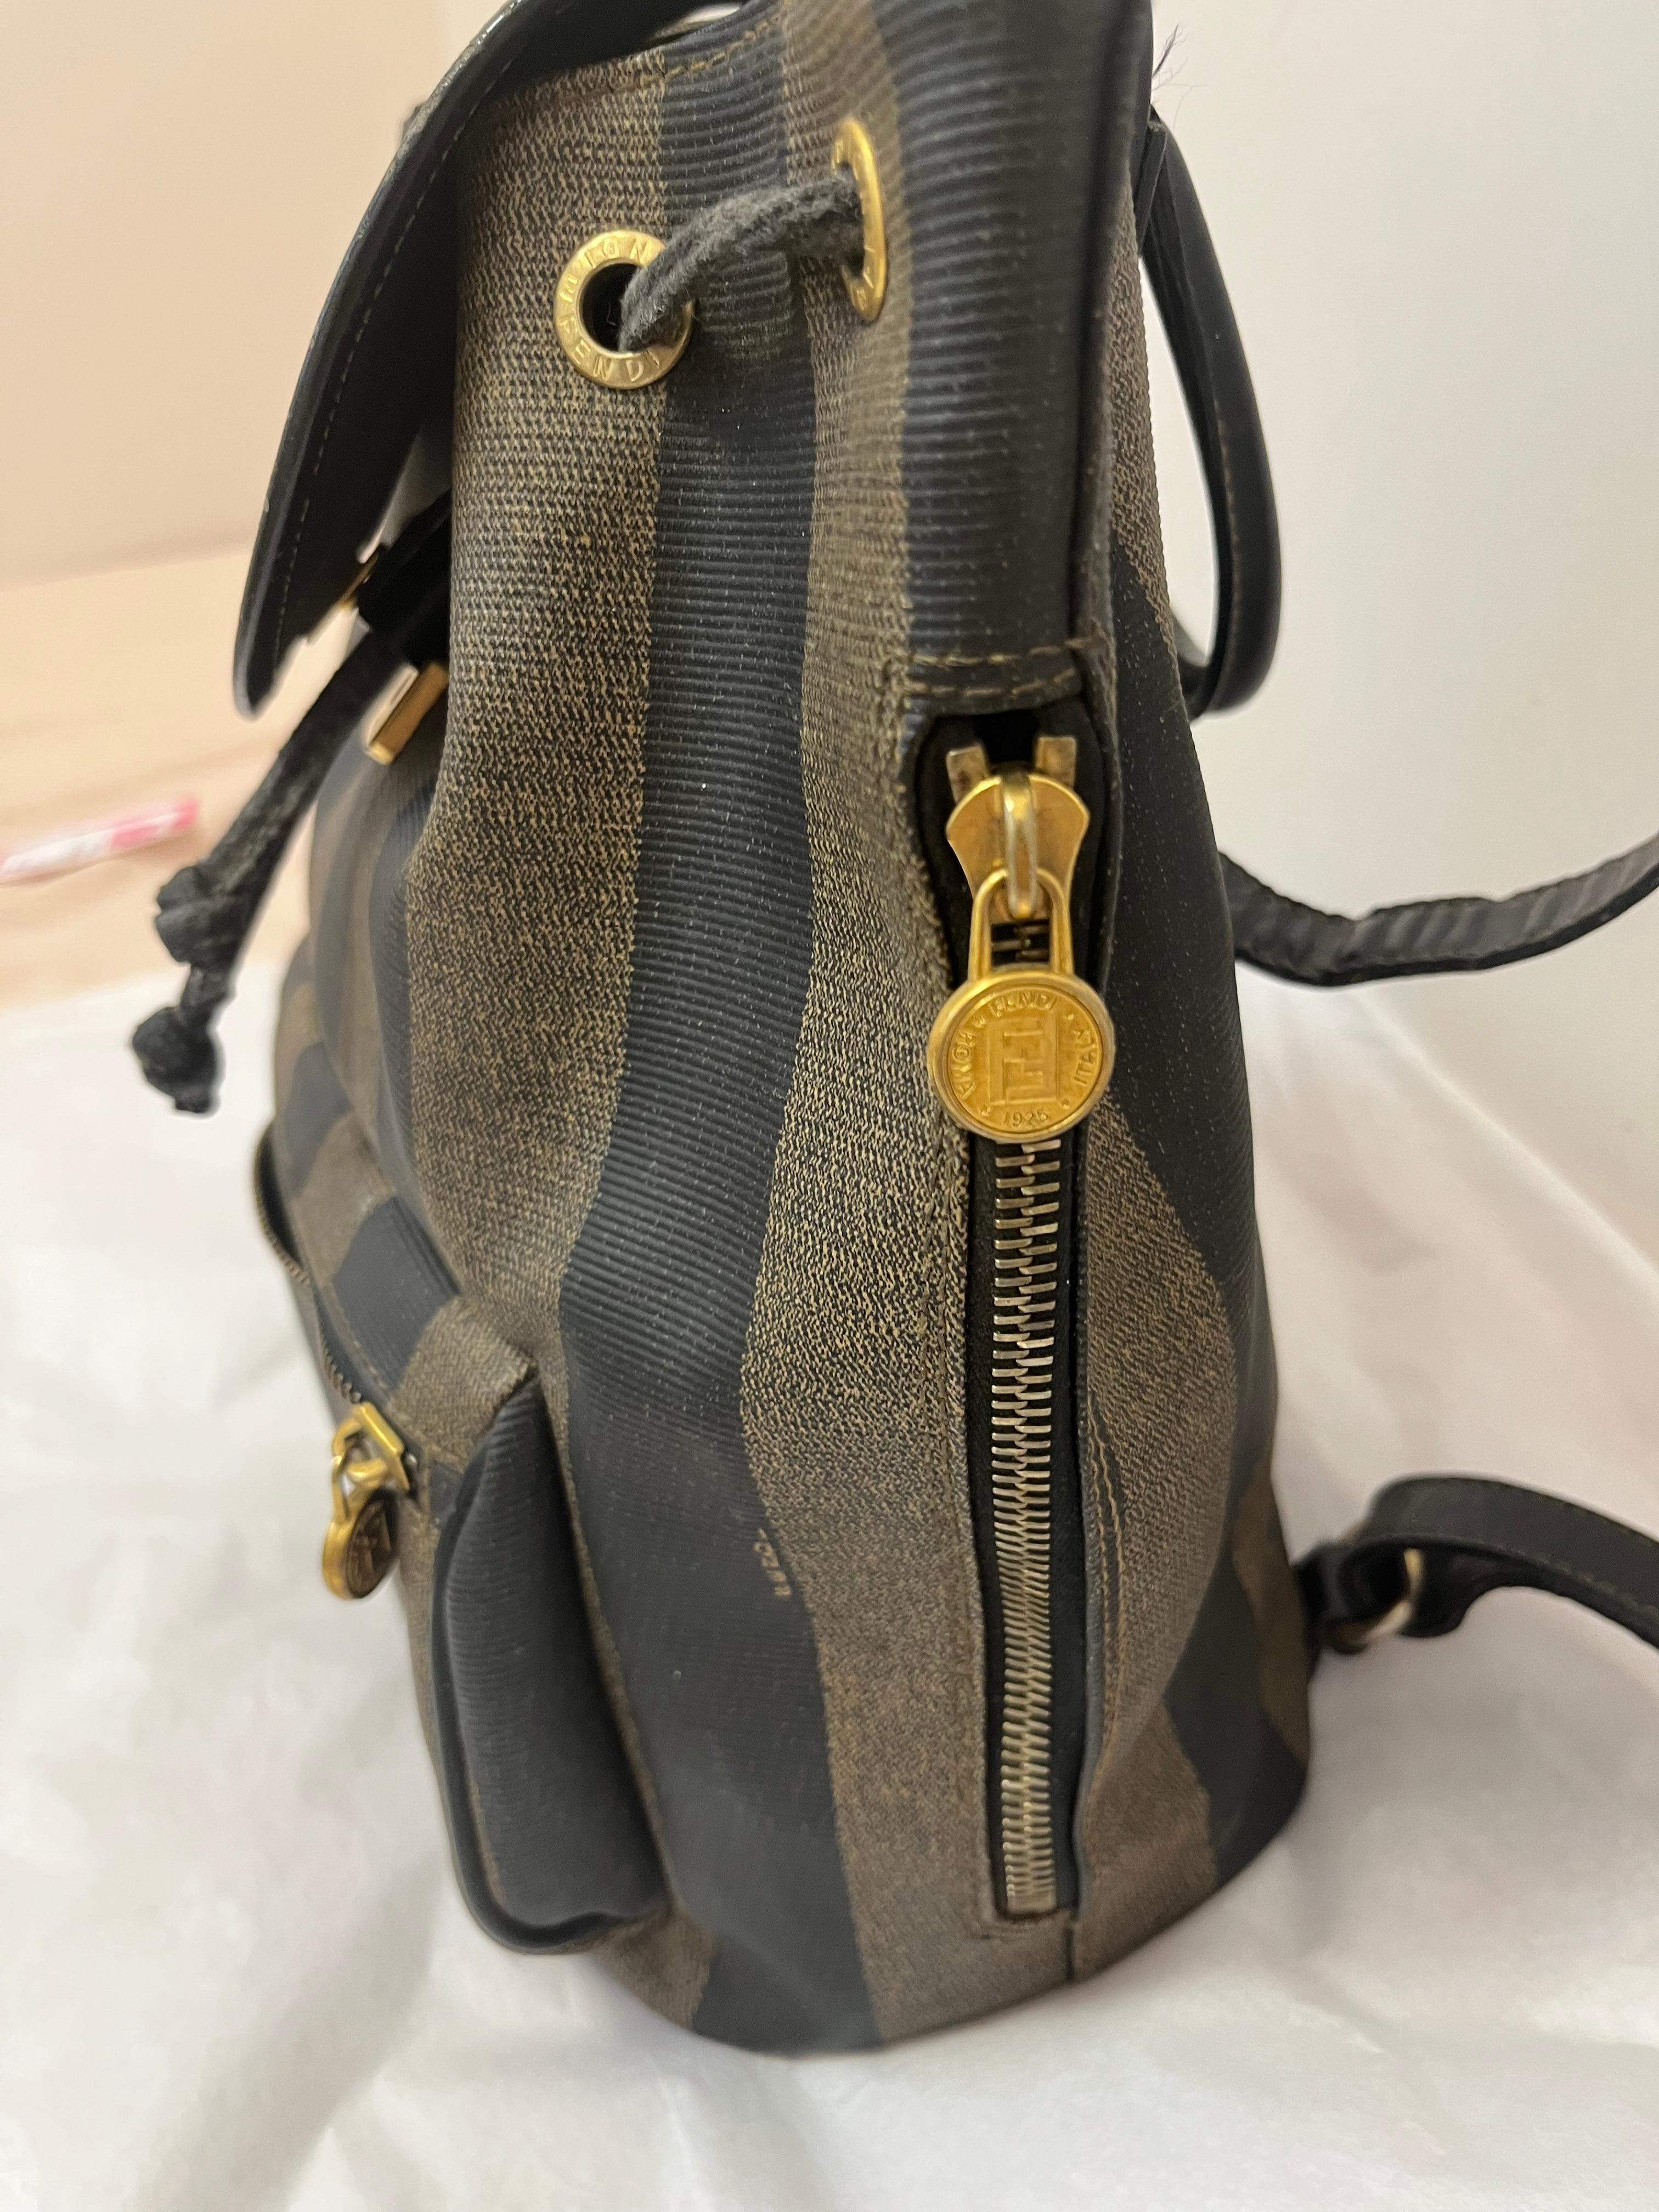 This 1980s Fendi backpack is in wonderful vintage condition, with wear only seen on the leather bucket pull. 
The backpack shoulder straps are adjustable and there is also a top handle.
The wide stripe monagram with the Fendi lettering is iconic for